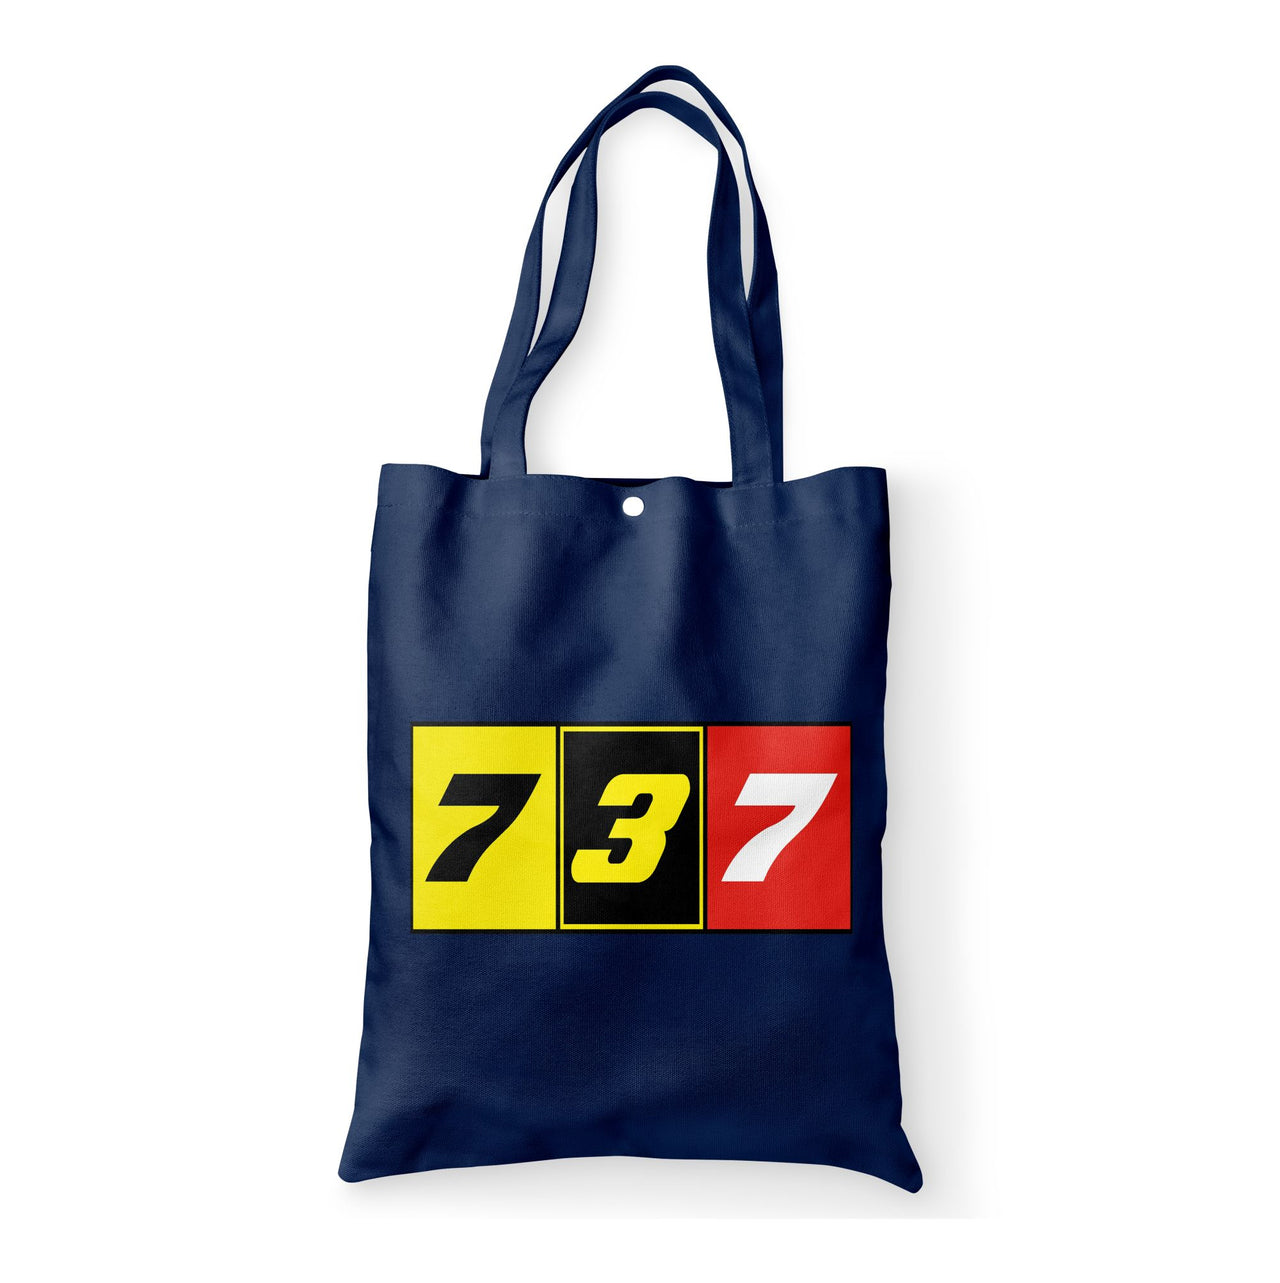 Flat Colourful 737 Designed Tote Bags